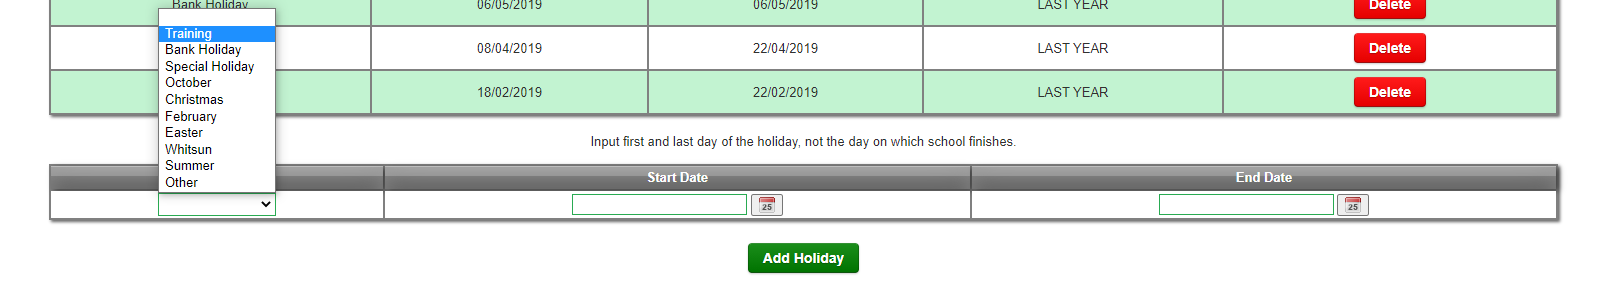 add holiday.png